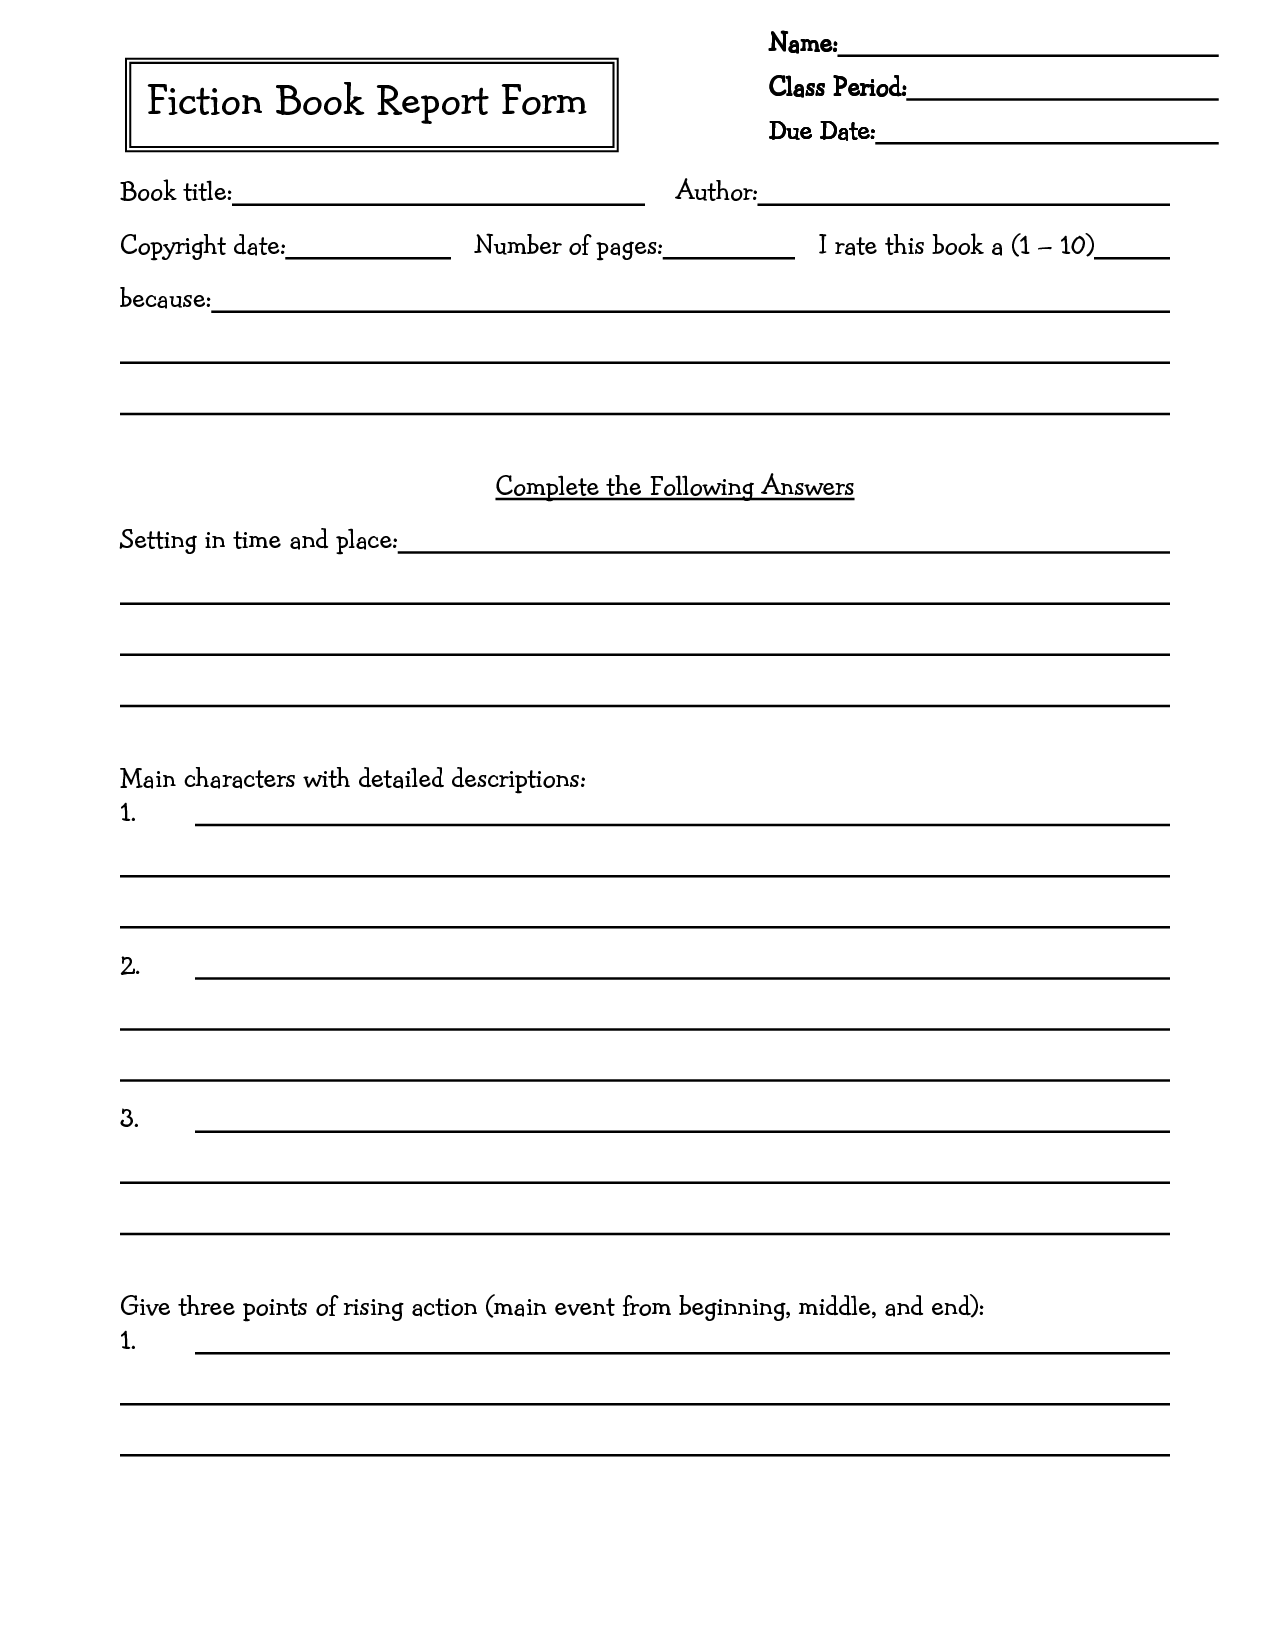 book-report-form-printable-printable-forms-free-online